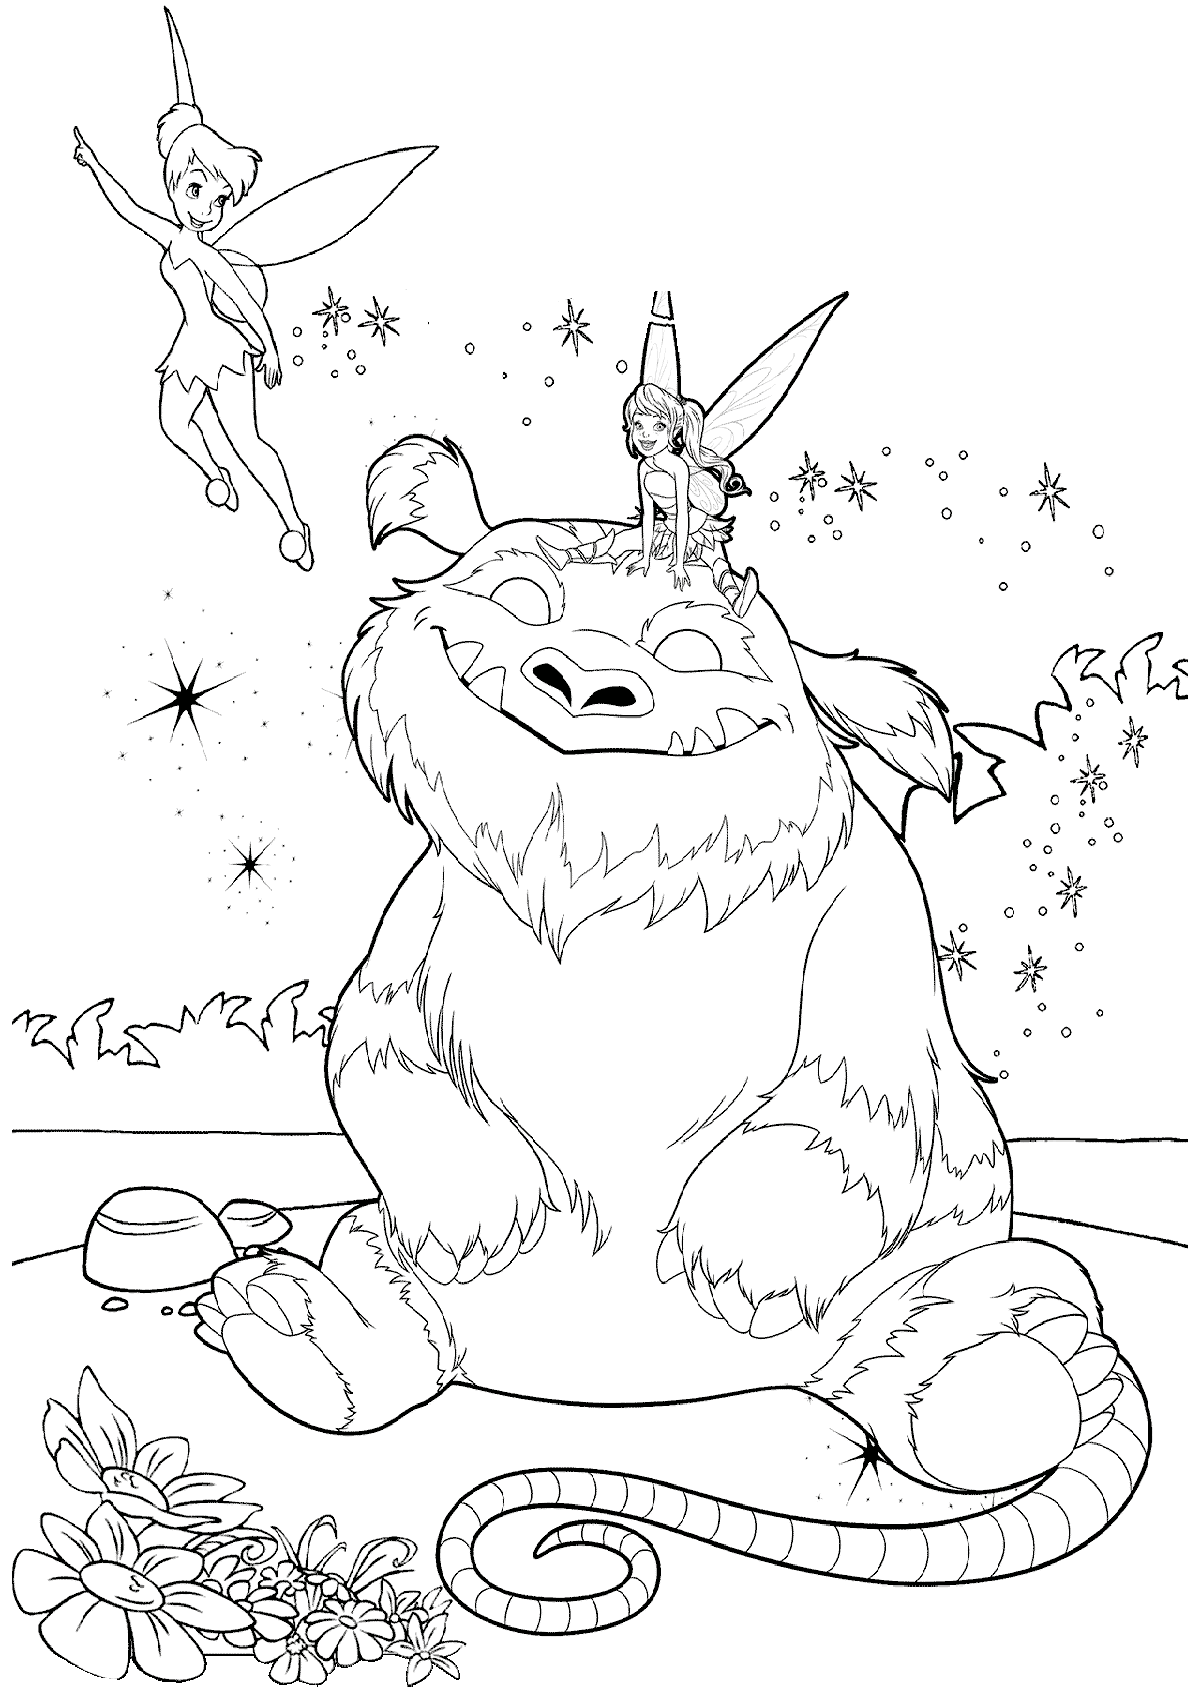 Tinker Bell and the Legend of the NeverBeast coloring pages to download